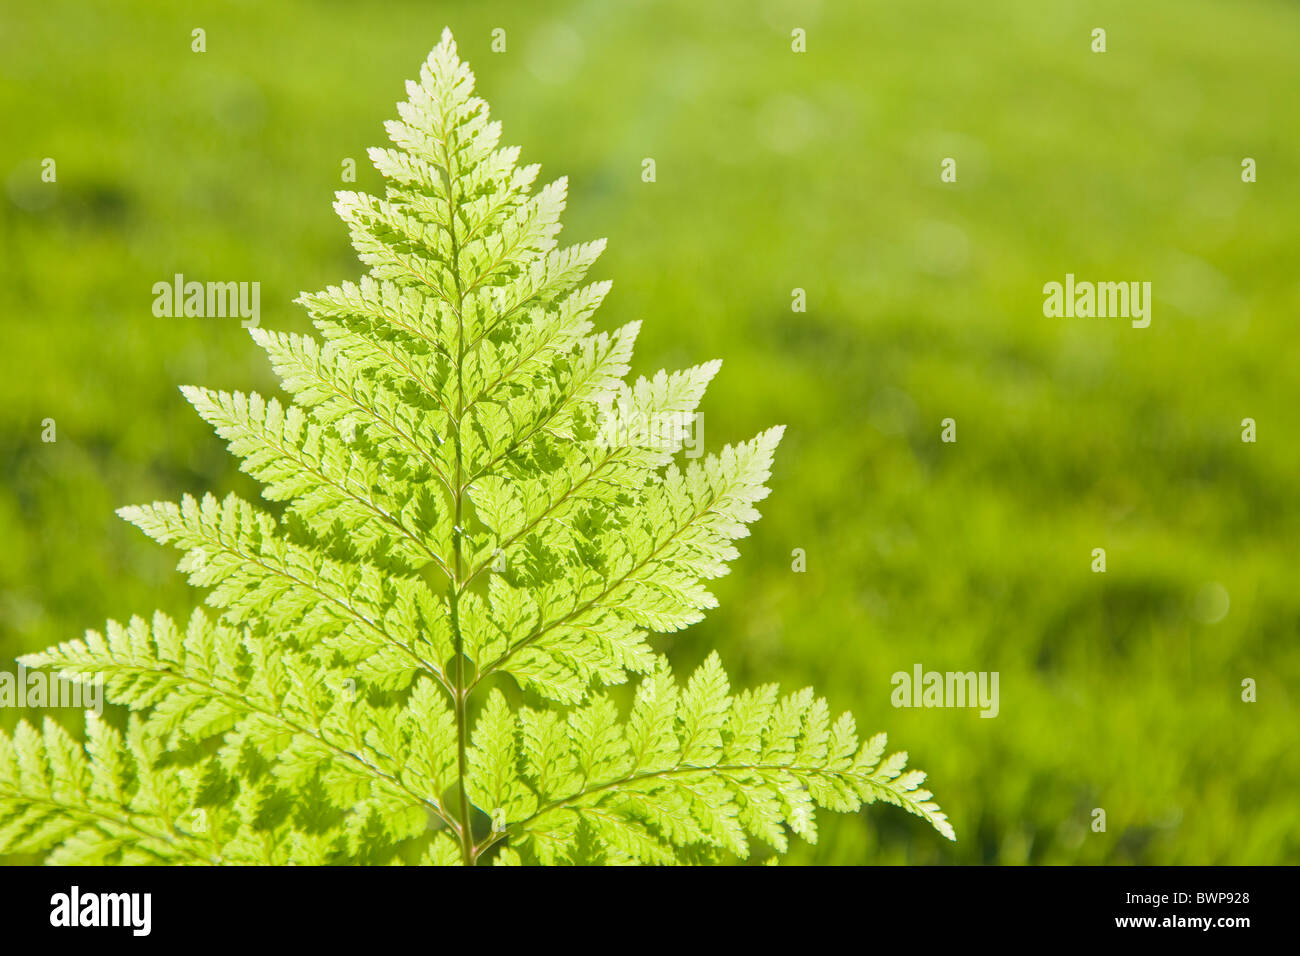 Fern leaves backlit on a green lawn Stock Photo